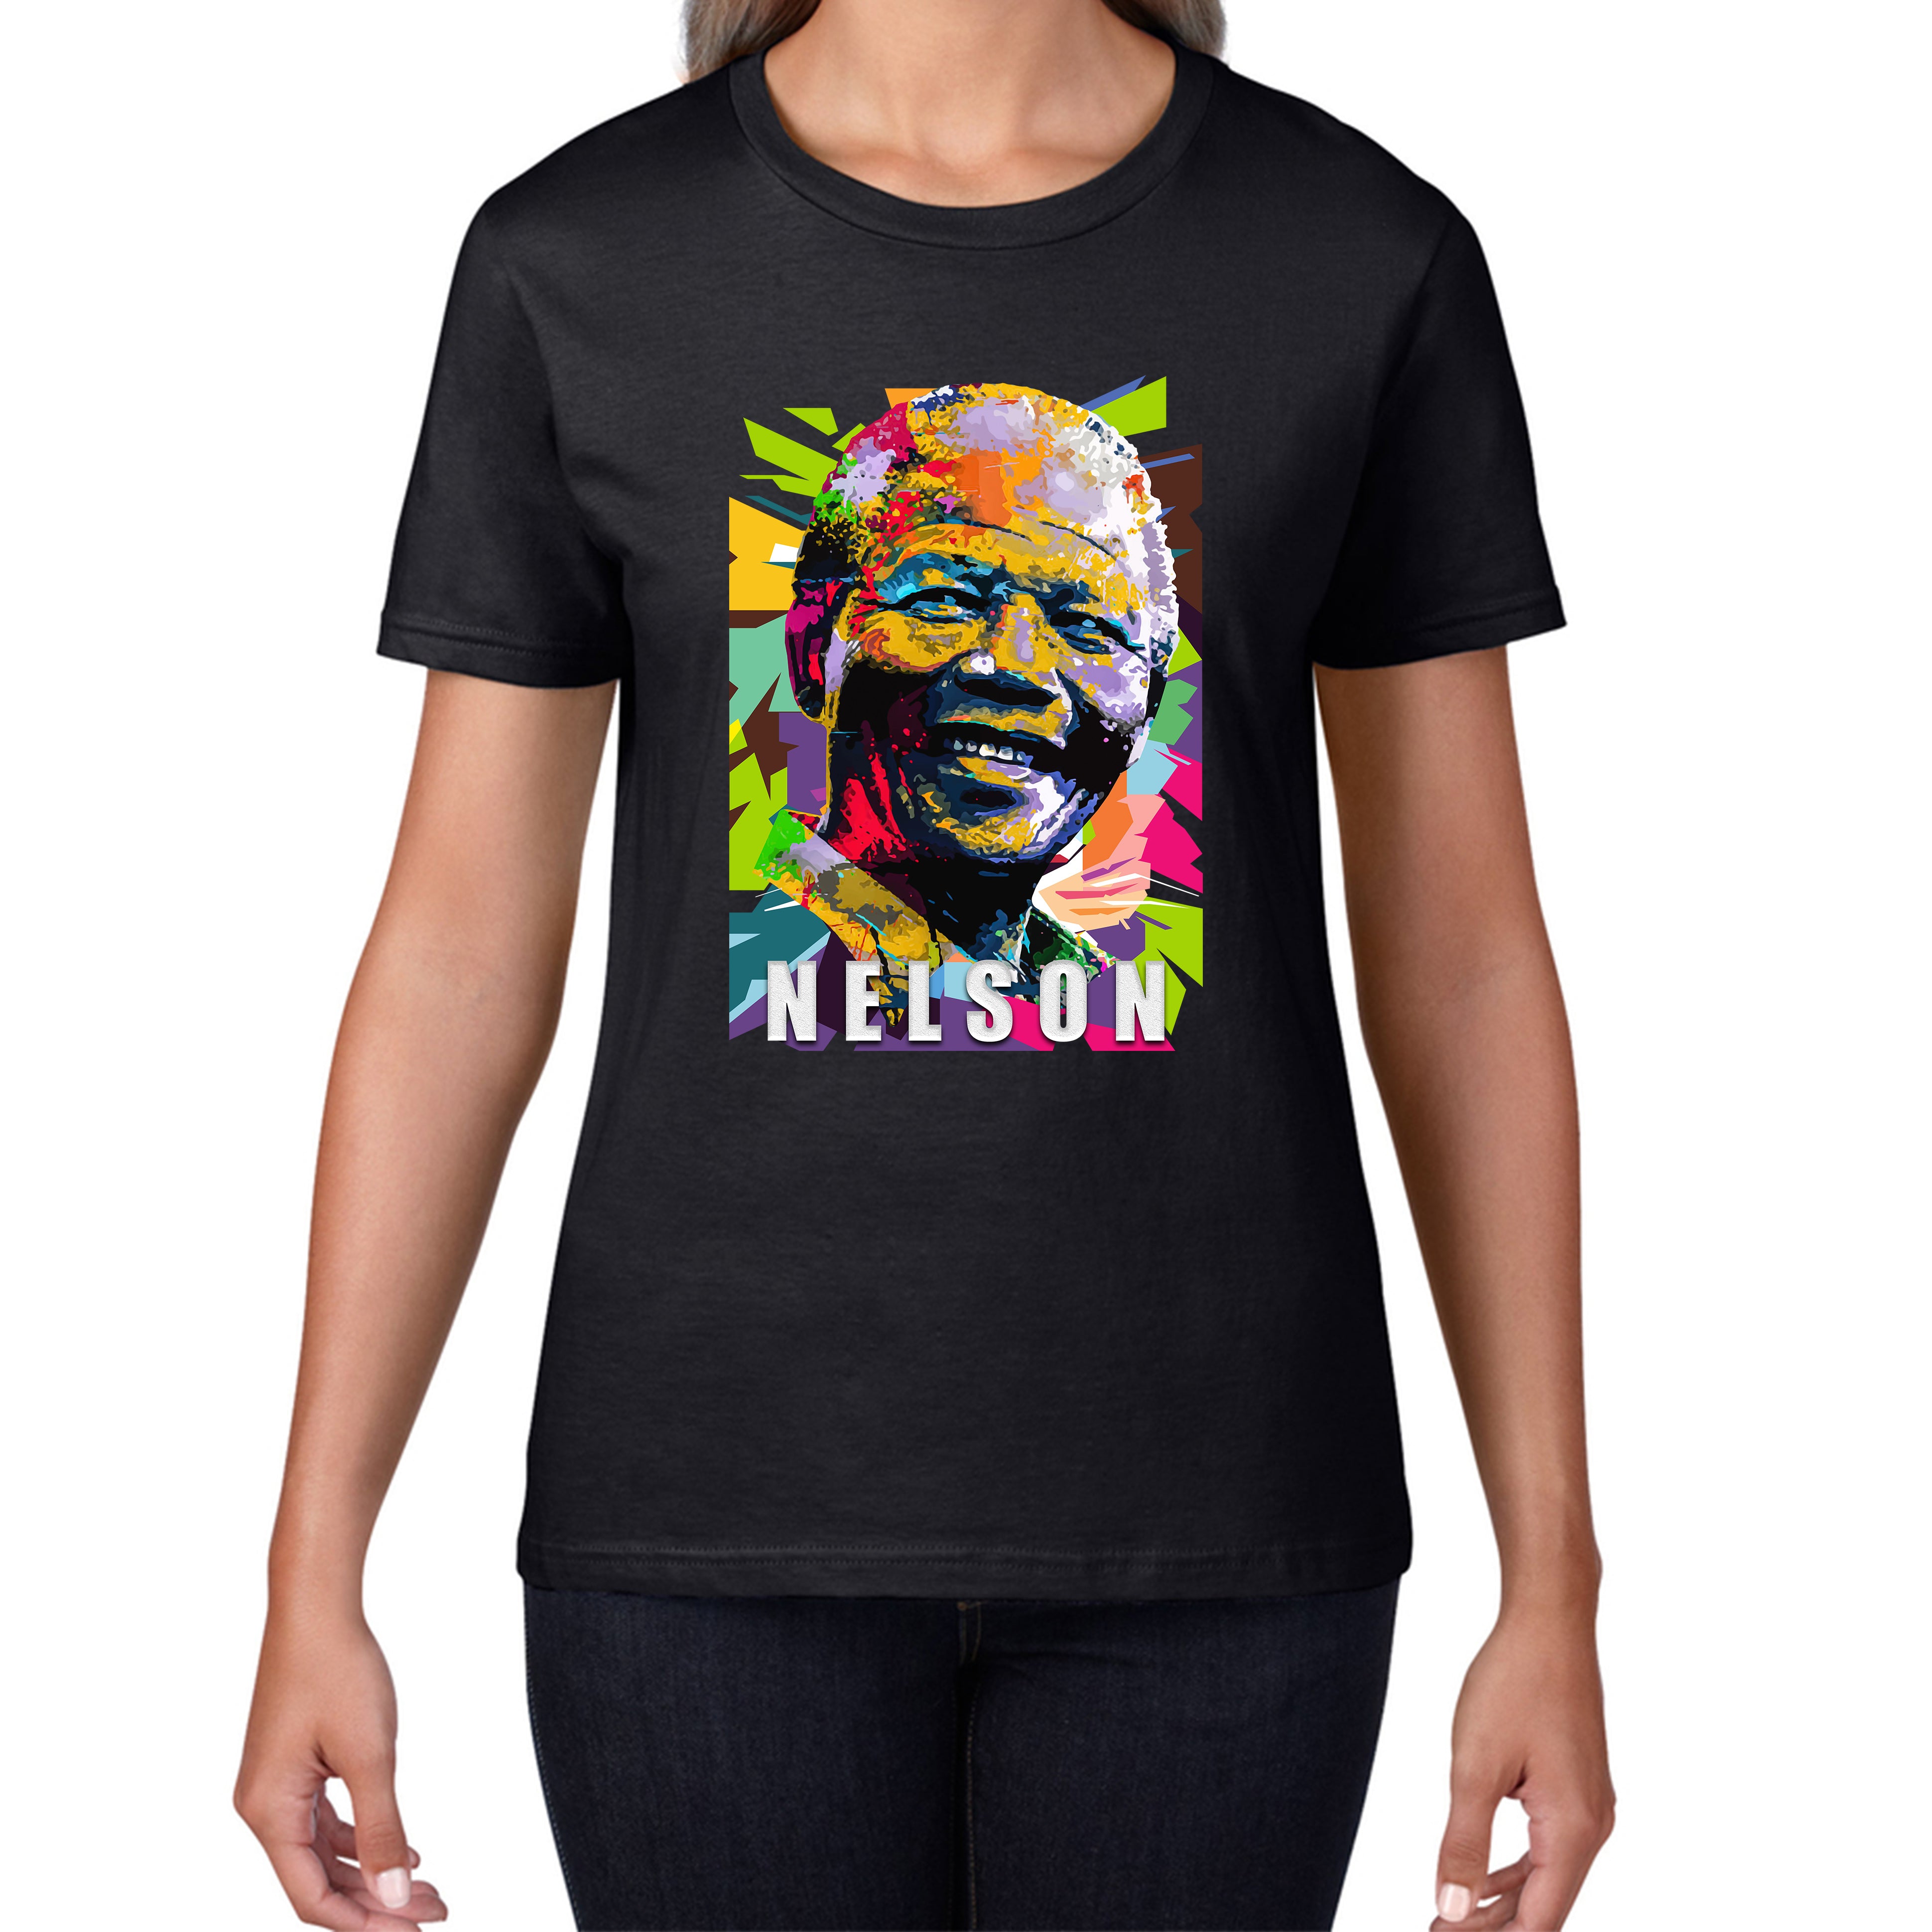 Nelson Mandela African freedom justice Political Leader Former President of South Africa Womens Tee Top